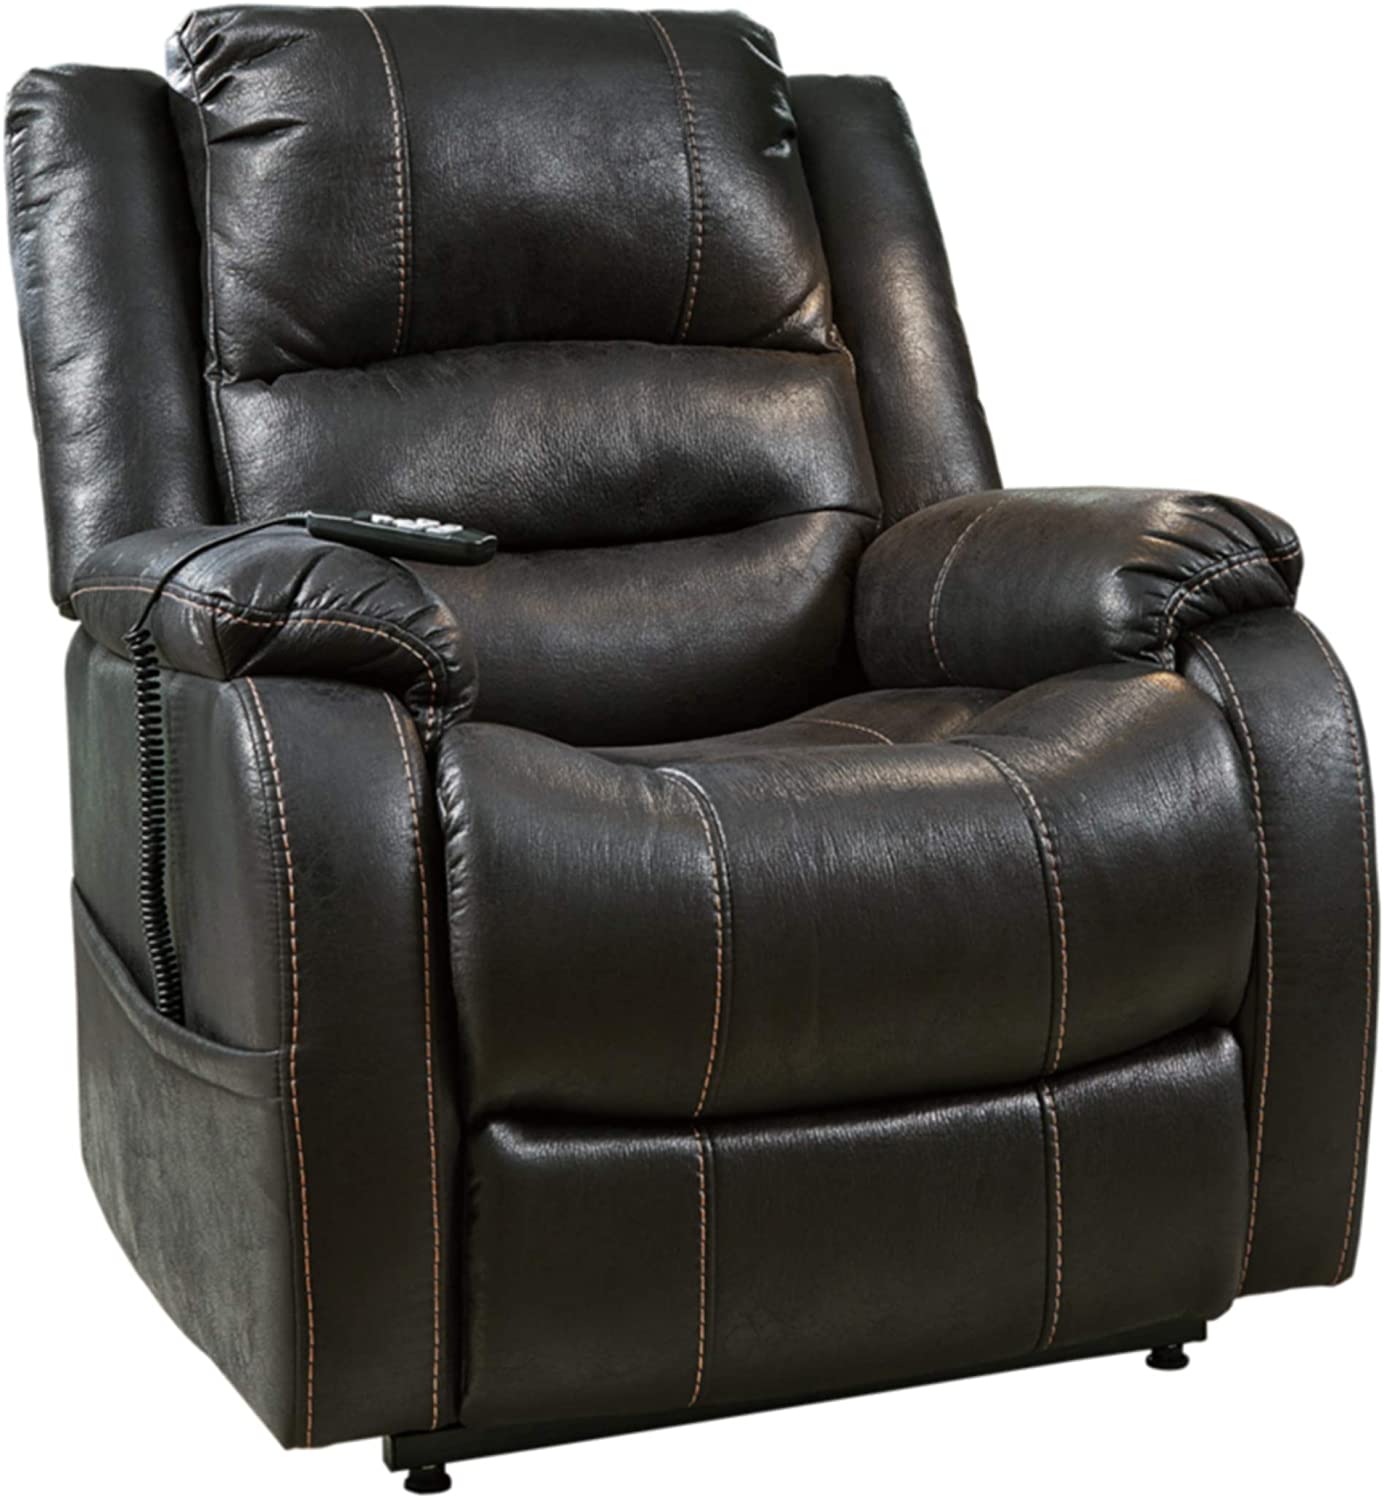 Signature design by ashley power lift recliner